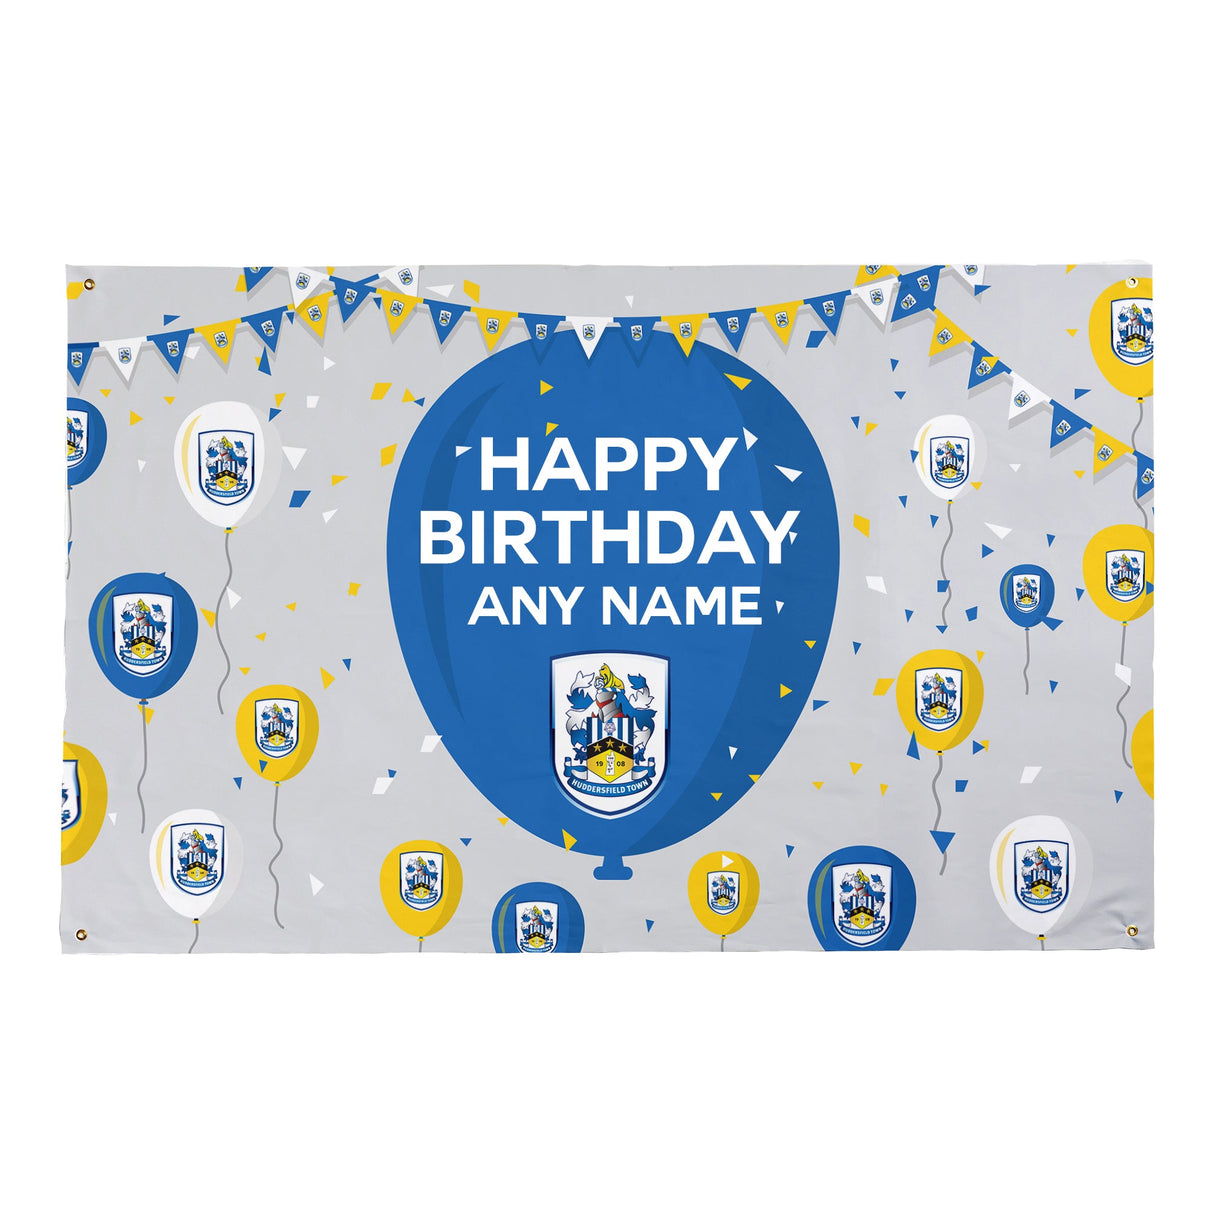 Personalised Huddersfield Town FC Birthday 5ft x 3ft Banner